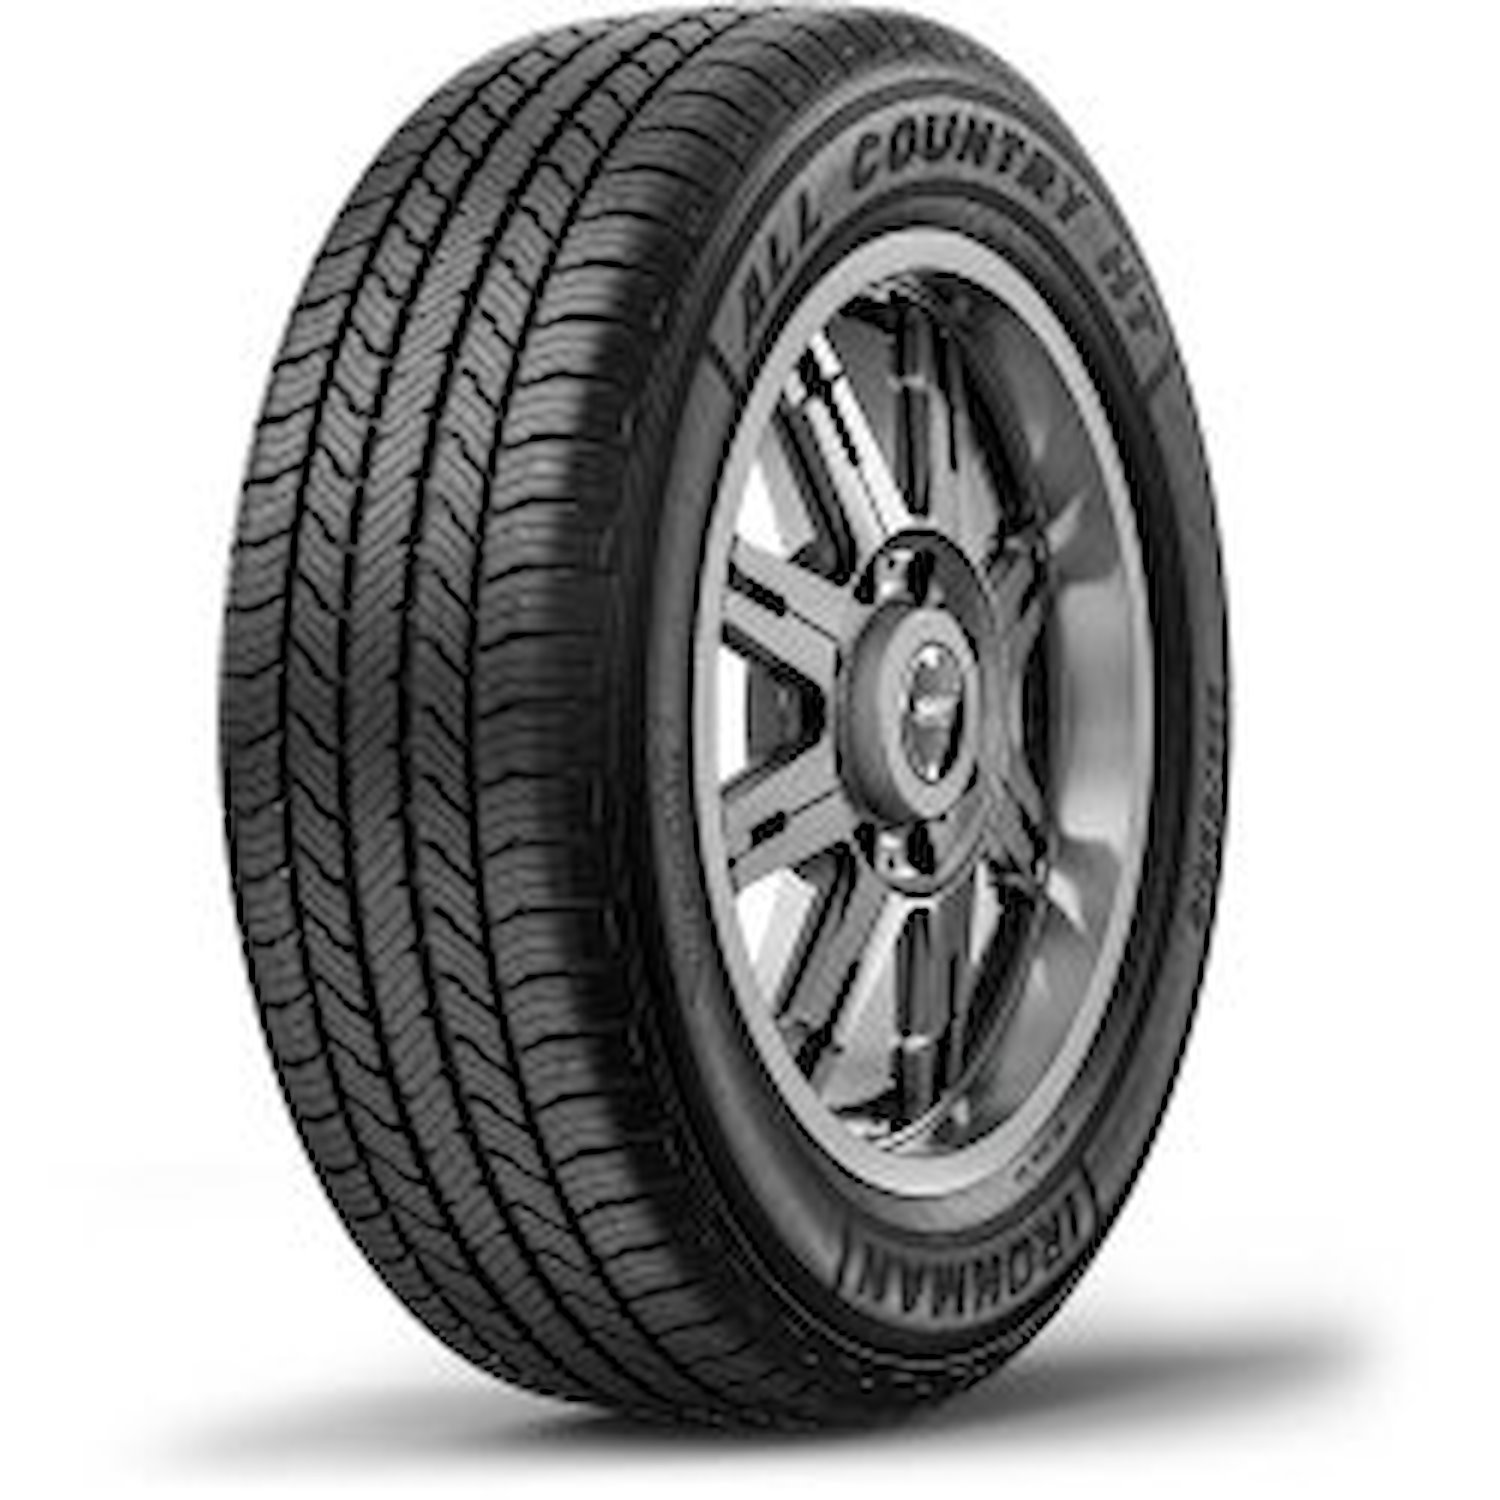 03071 All Country HT Tire, 265/75R16, 116T